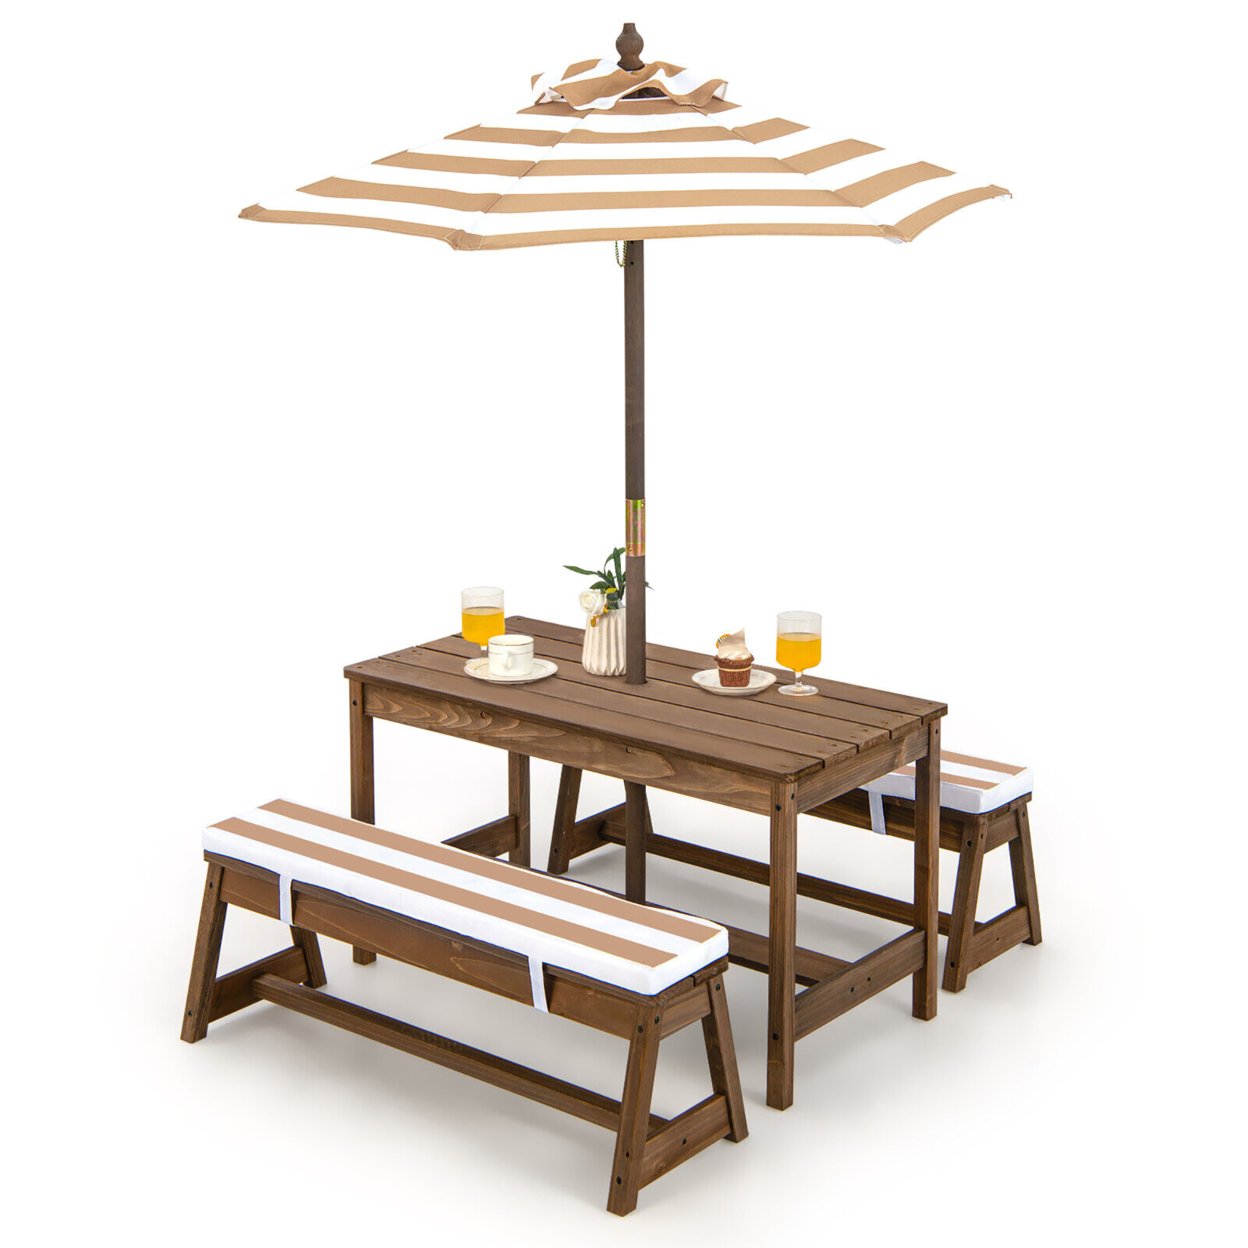 Kids Wood Picnic Table And Bench Set W/ Cushions Umbrella For Indoor Outdoor - Brown